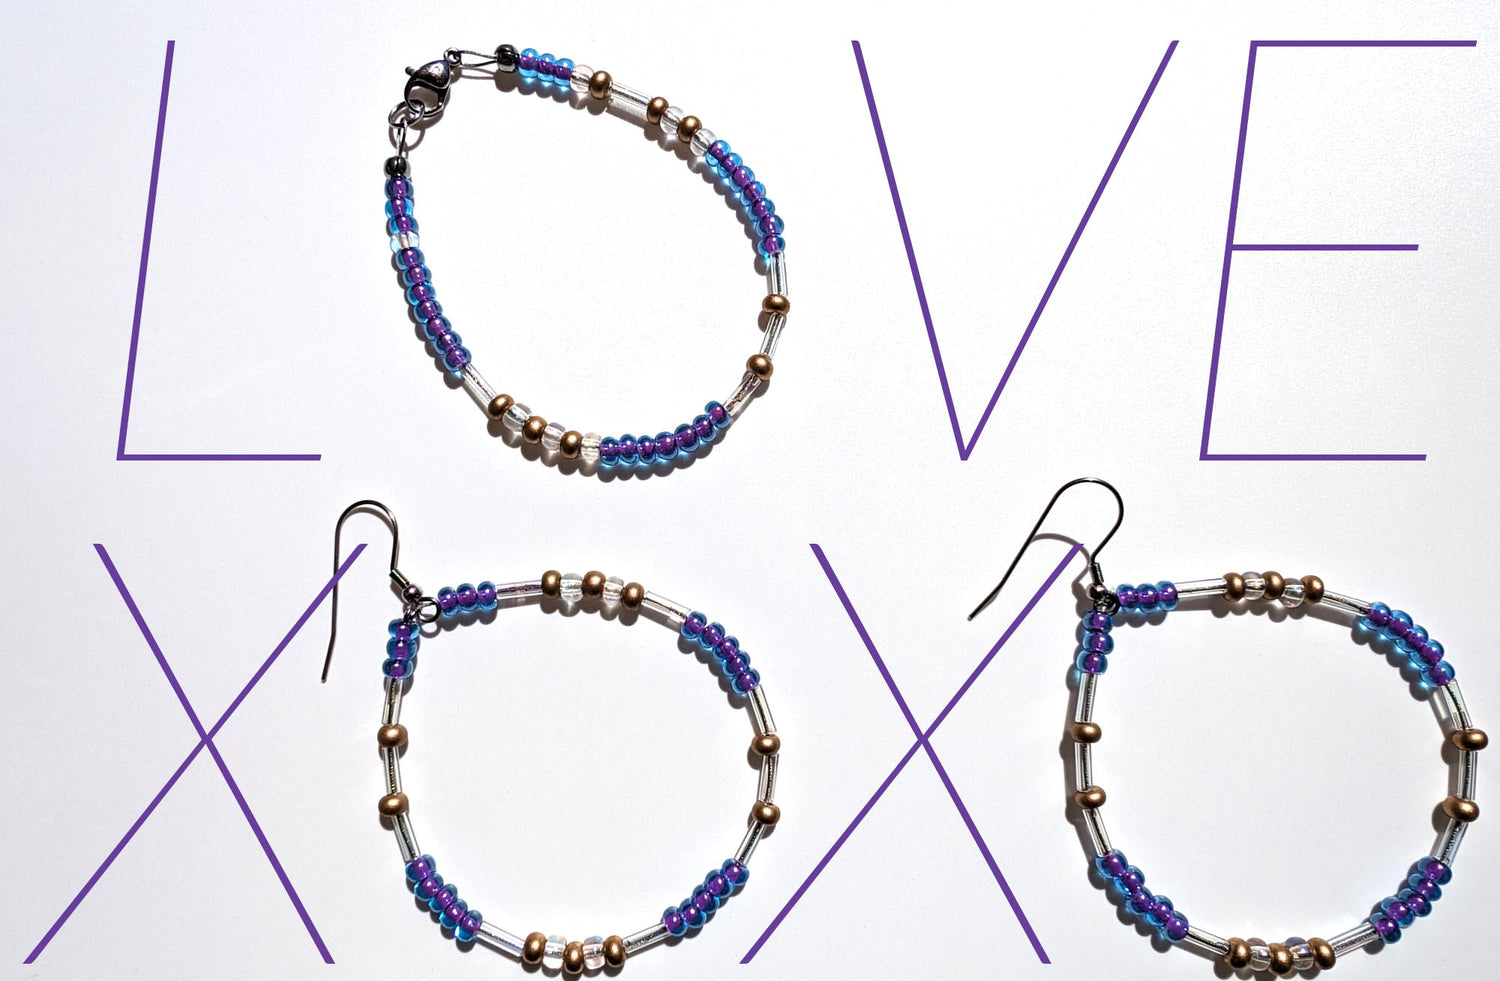 Special banner for our Love & Kisses Combo that shows our Smoothie Glitter LOVE Morse Code Bracelet and our XOXO More Code Earrings.